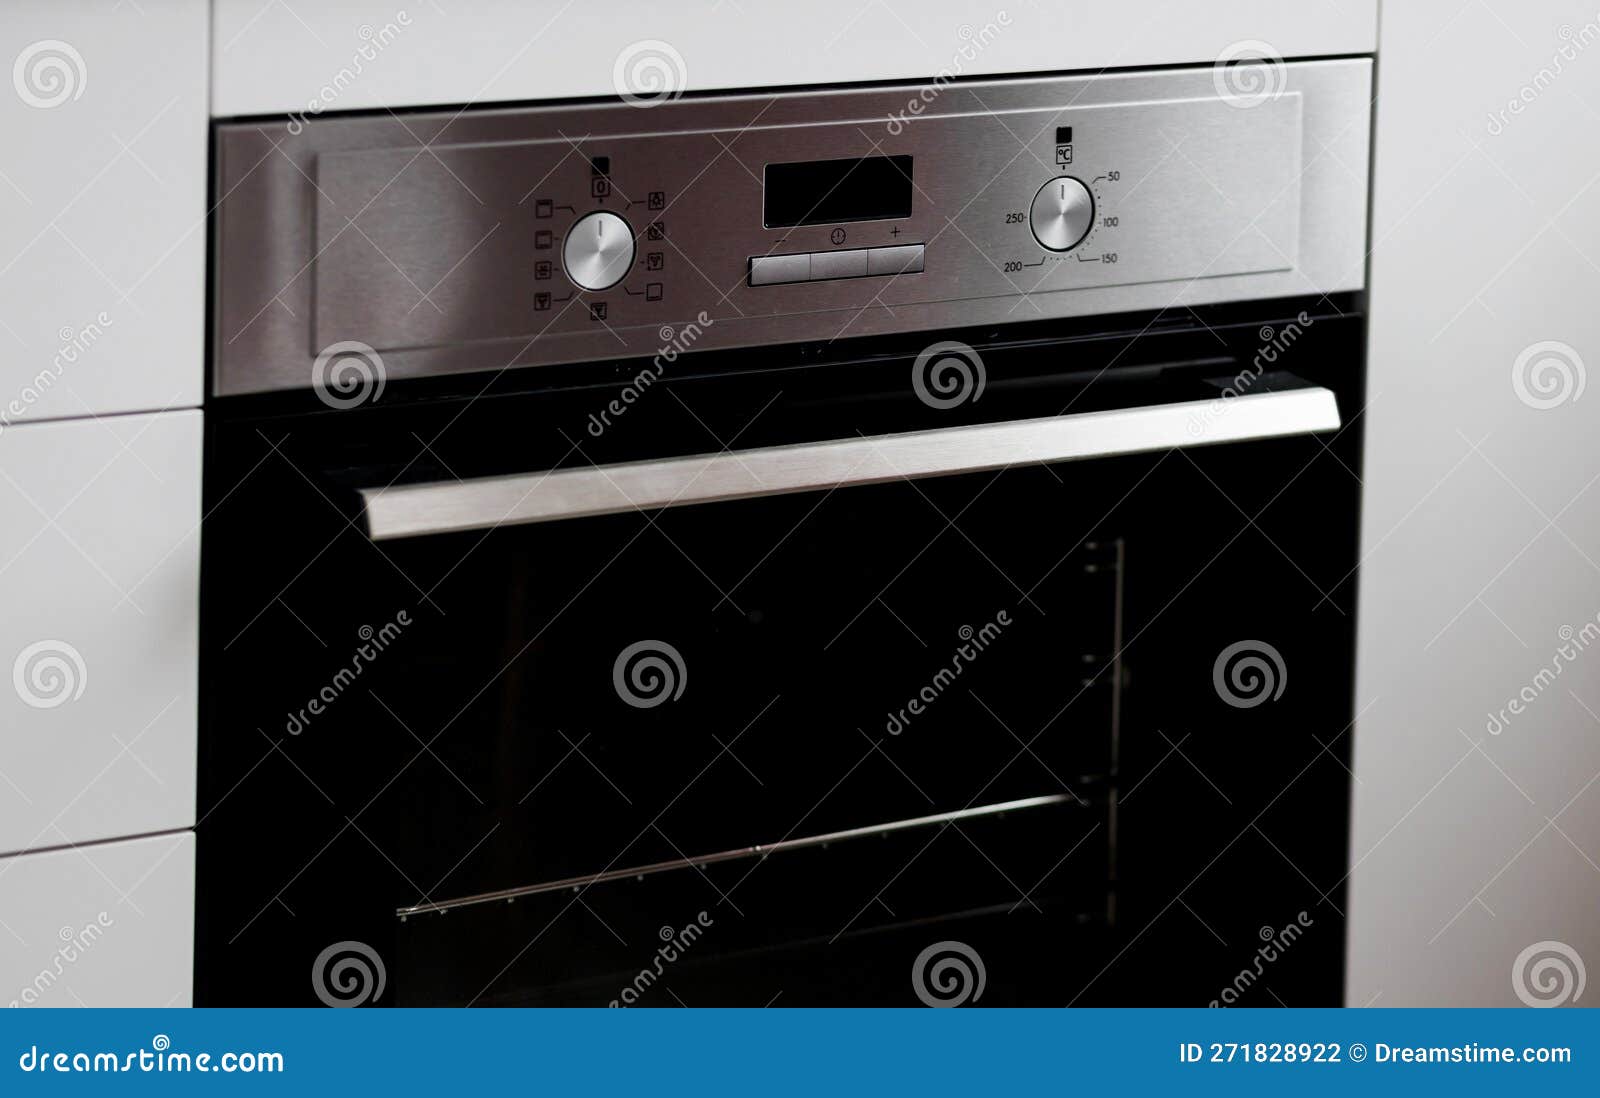 optager Dom Rendezvous New Electric Oven in Kitchen Stock Photo - Image of design, cook: 271828922